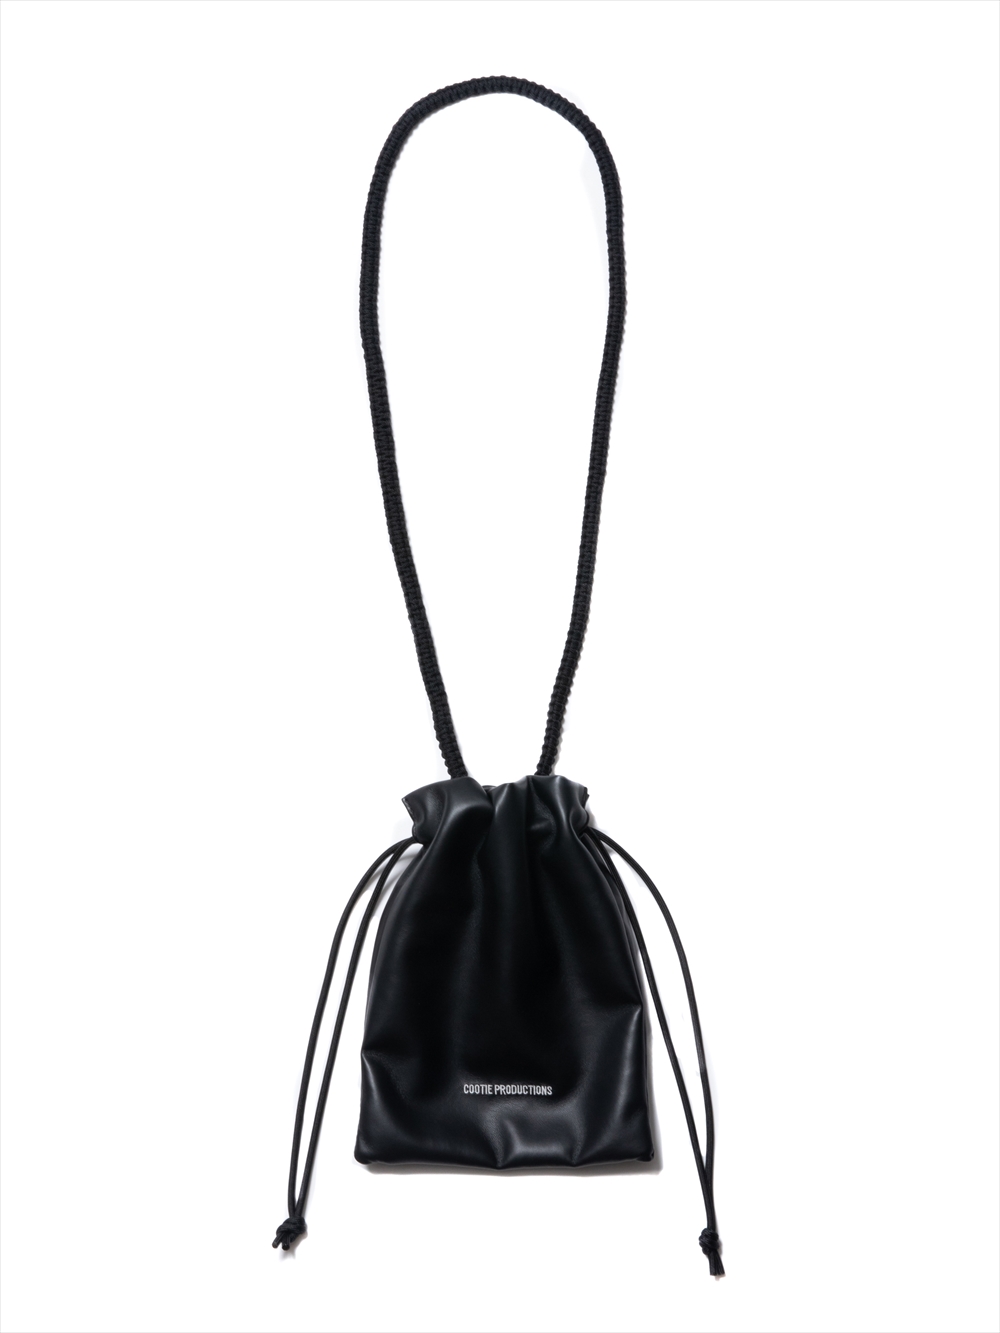 COOTIE PRODUCTIONS/Fake Leather Drawstring Bag（ブラック 